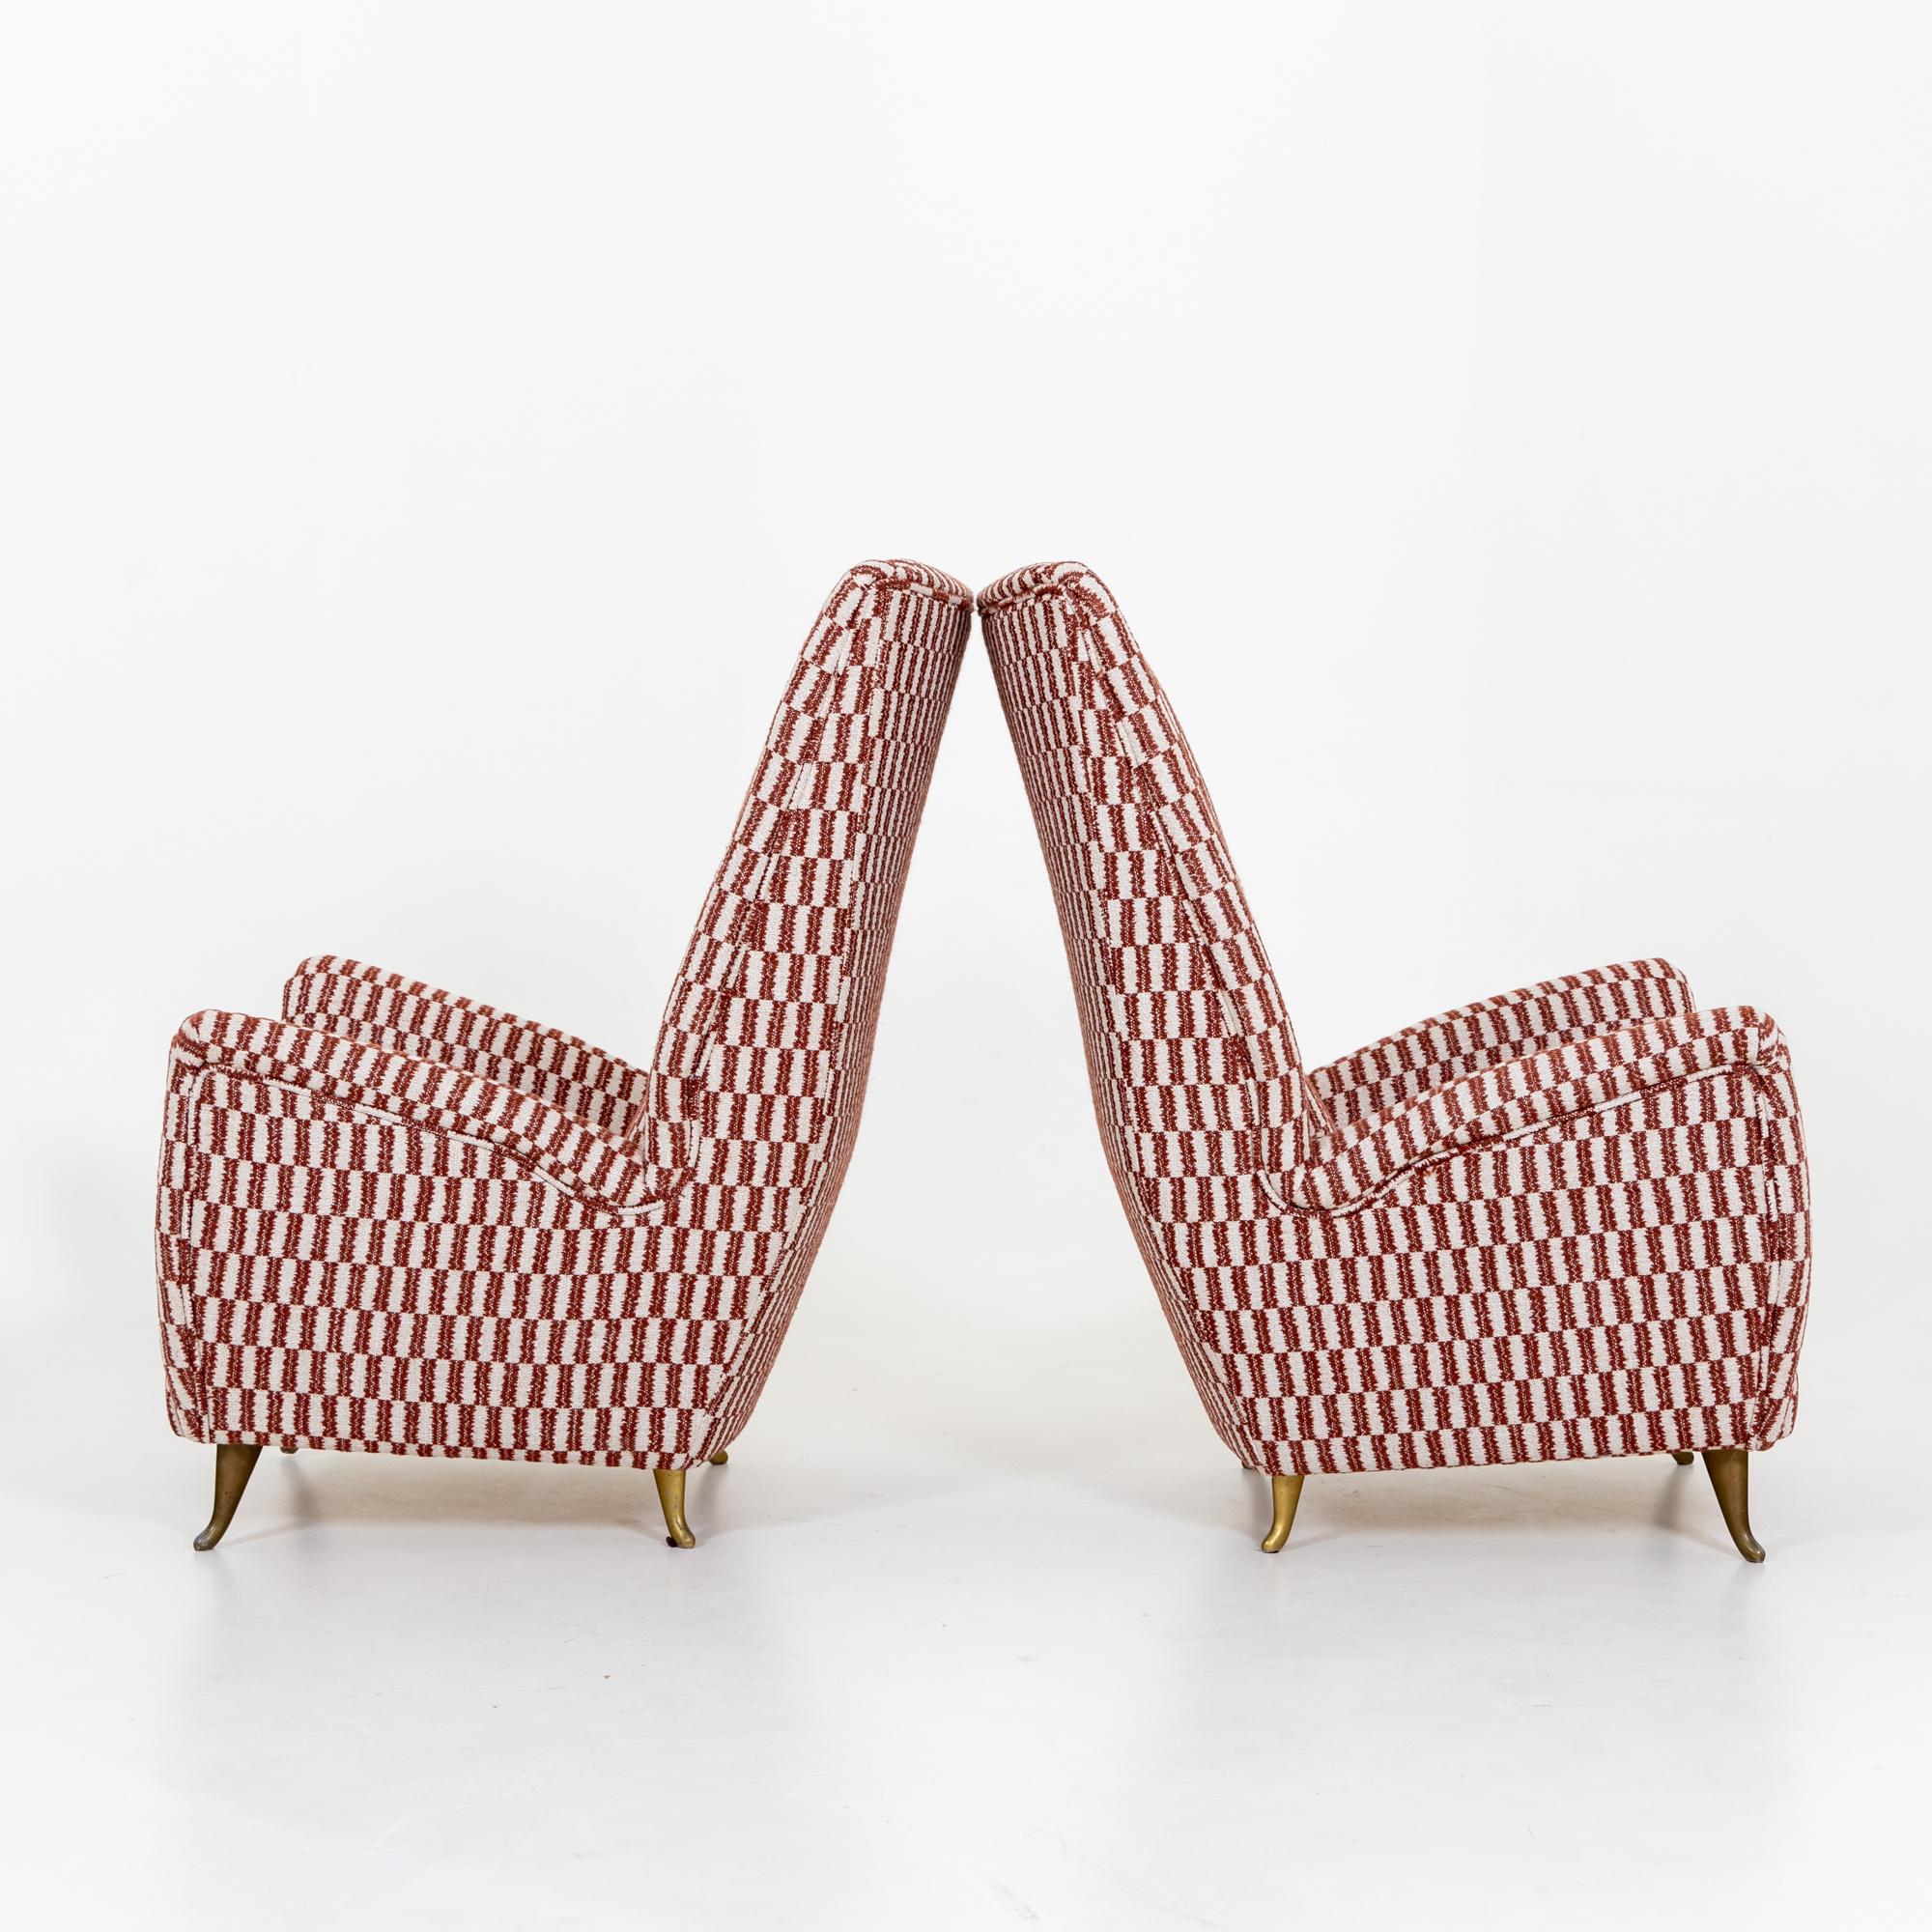 Italian Pair Lounge Chairs by Gio Ponti for Isa Bergamo, Italy 1950s For Sale